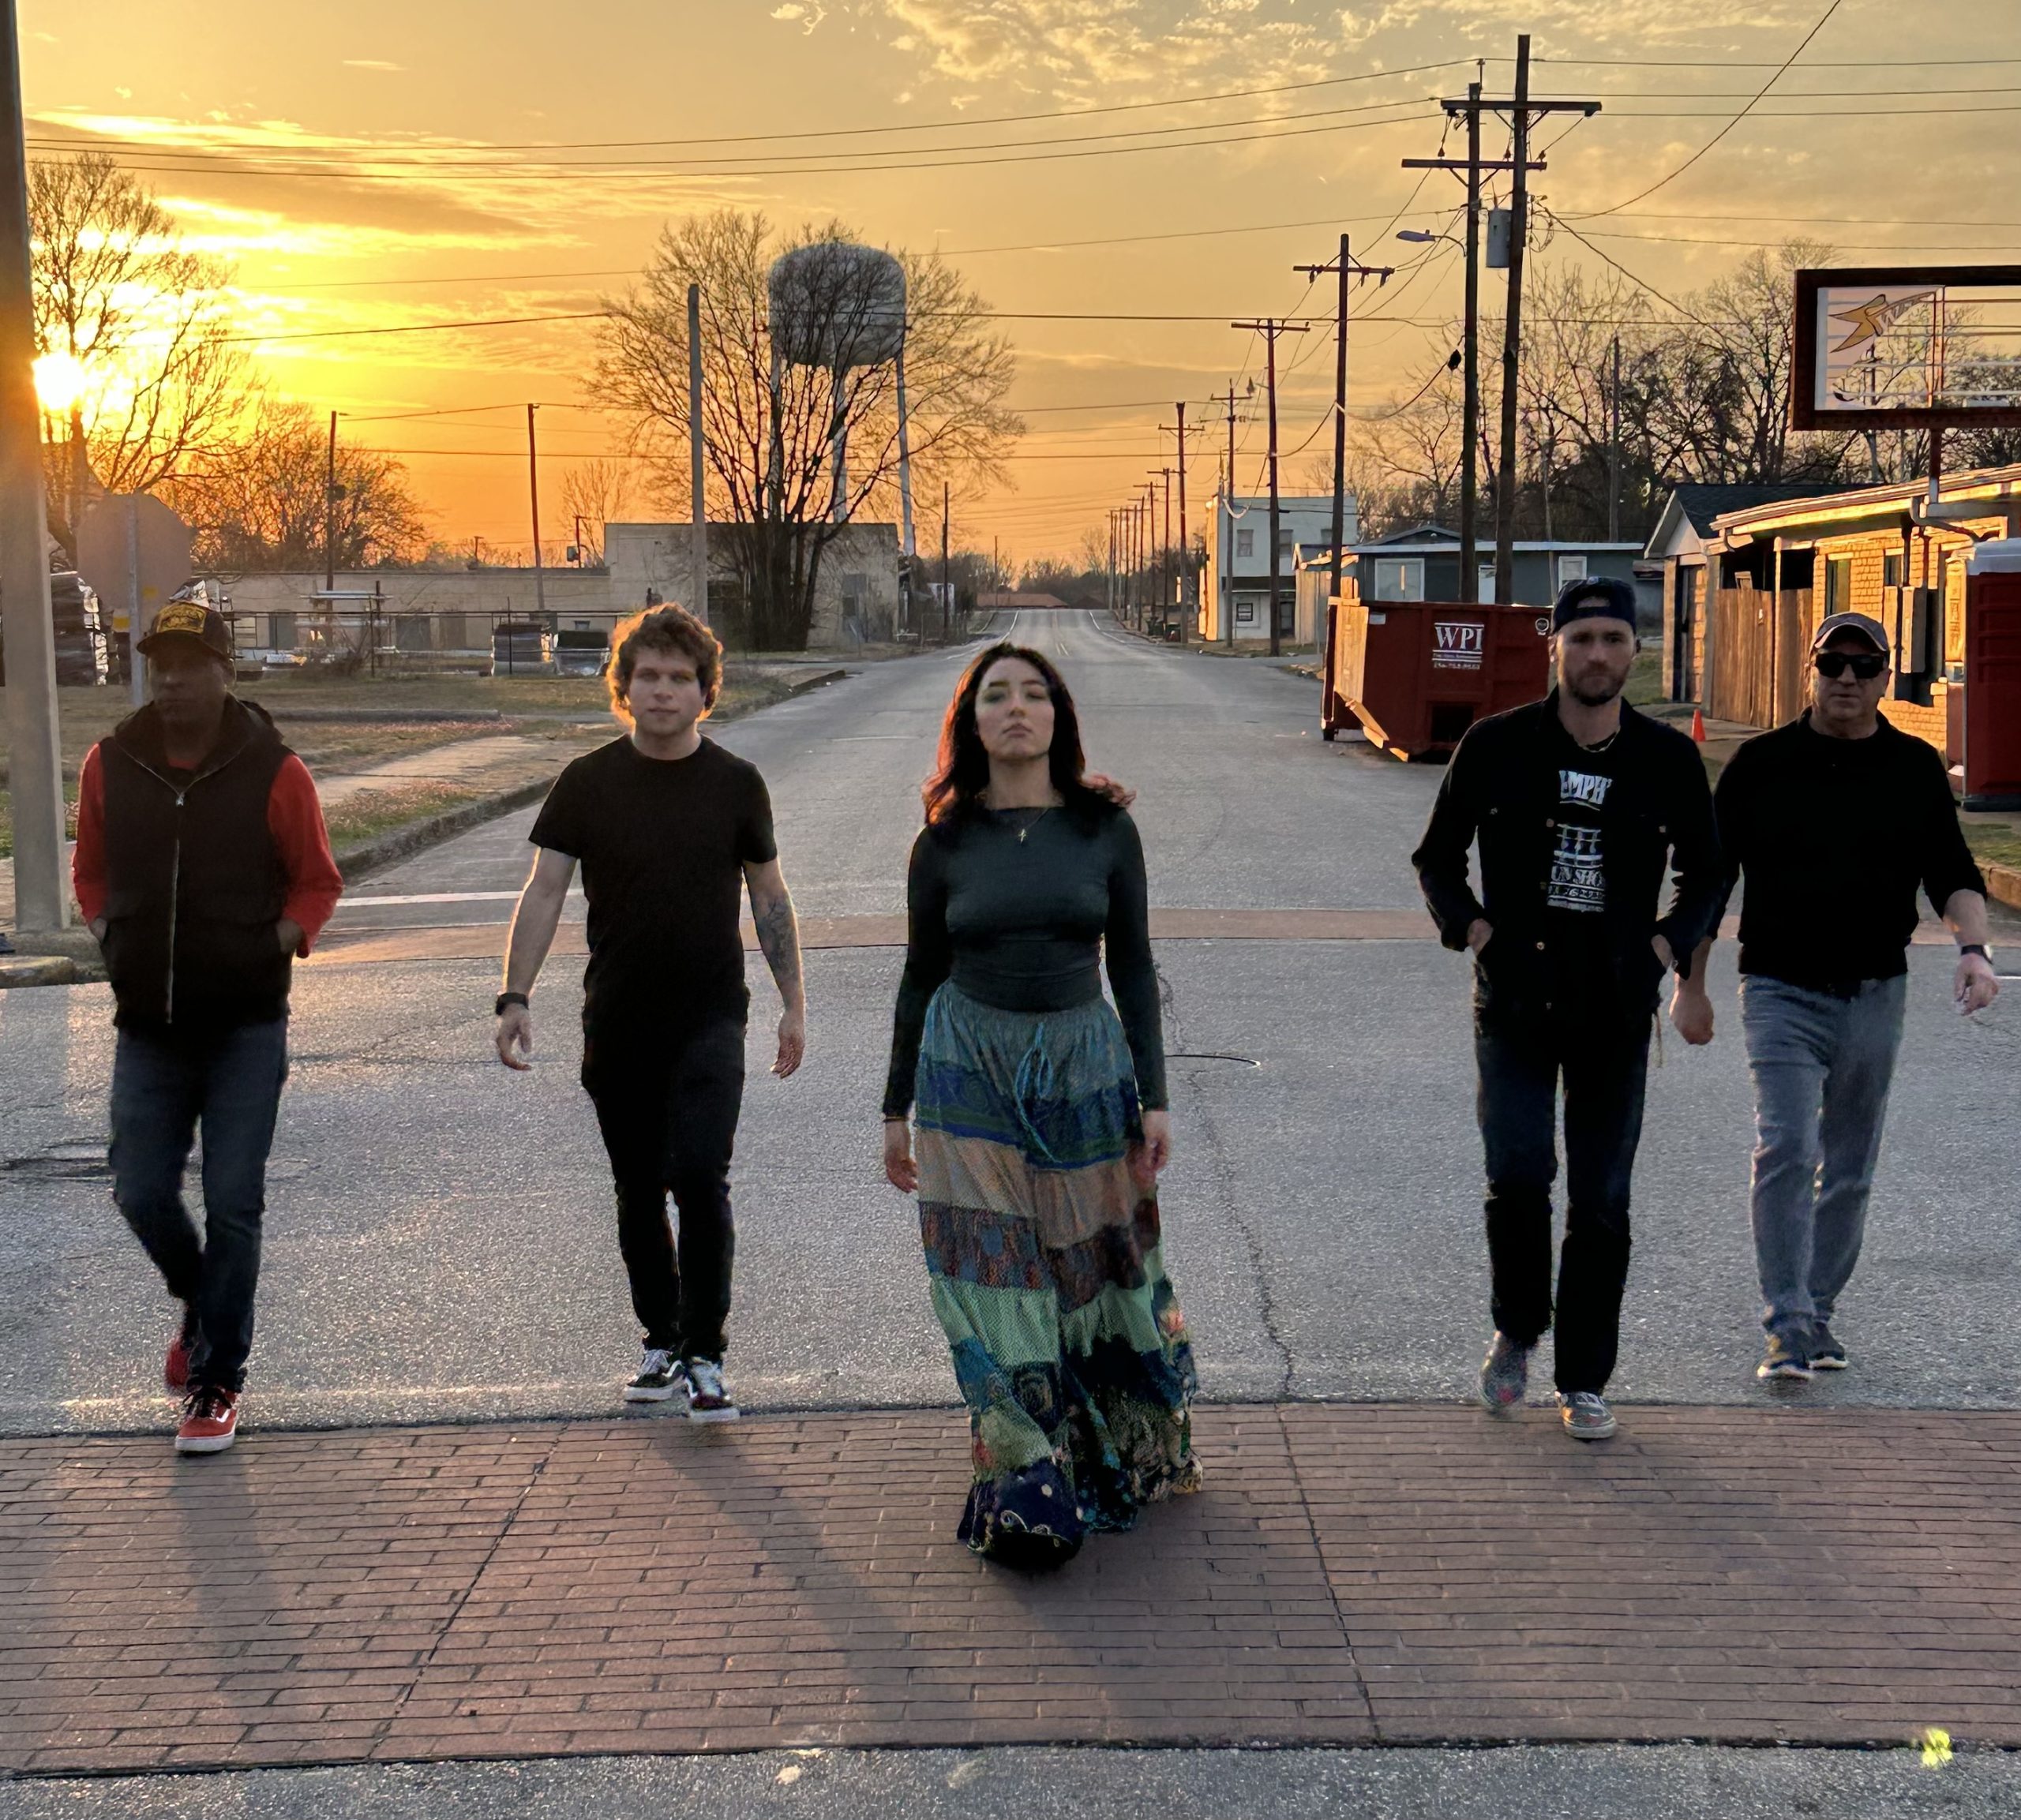 The members of the Saycouth band walk towards the camera during a sunset, on a street in a small town.